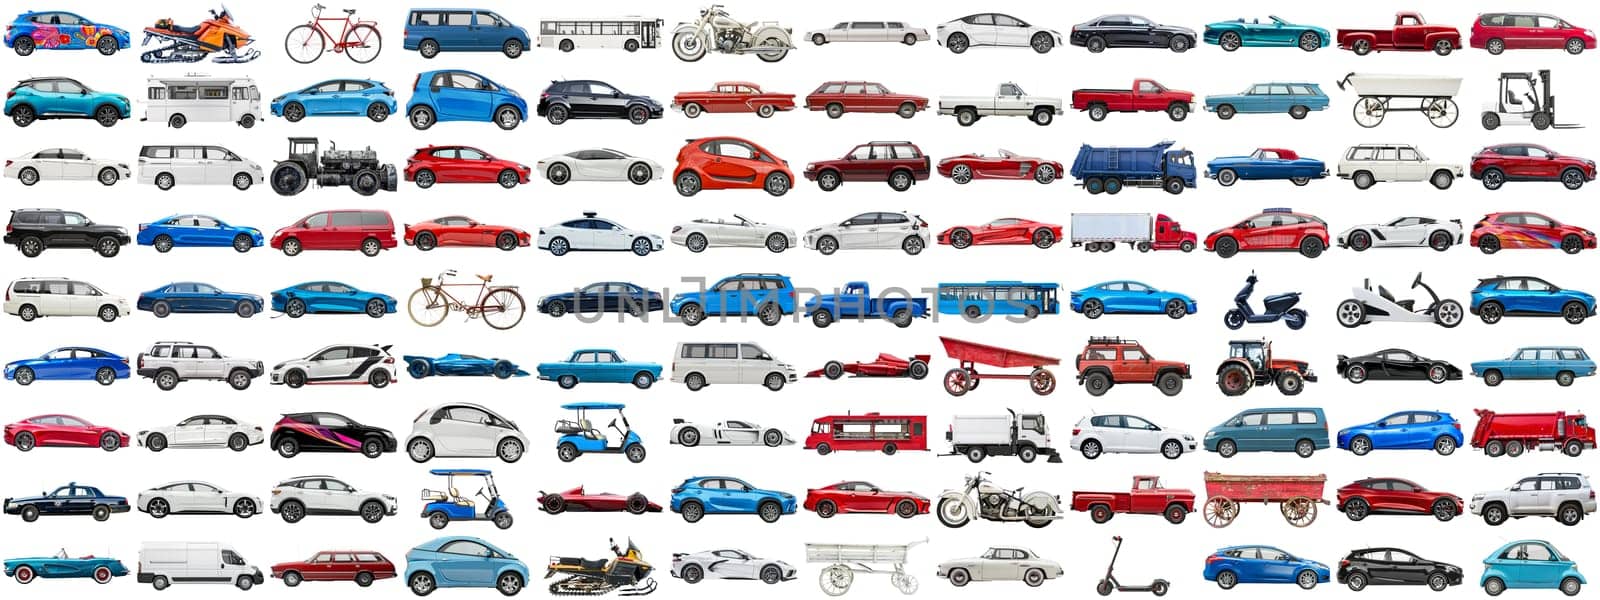 108 cars and various vehicles set of sedan, sports car, super car, bus, electric car, race car and other motor vehicles, many car photo collection set on isolated background AIG44